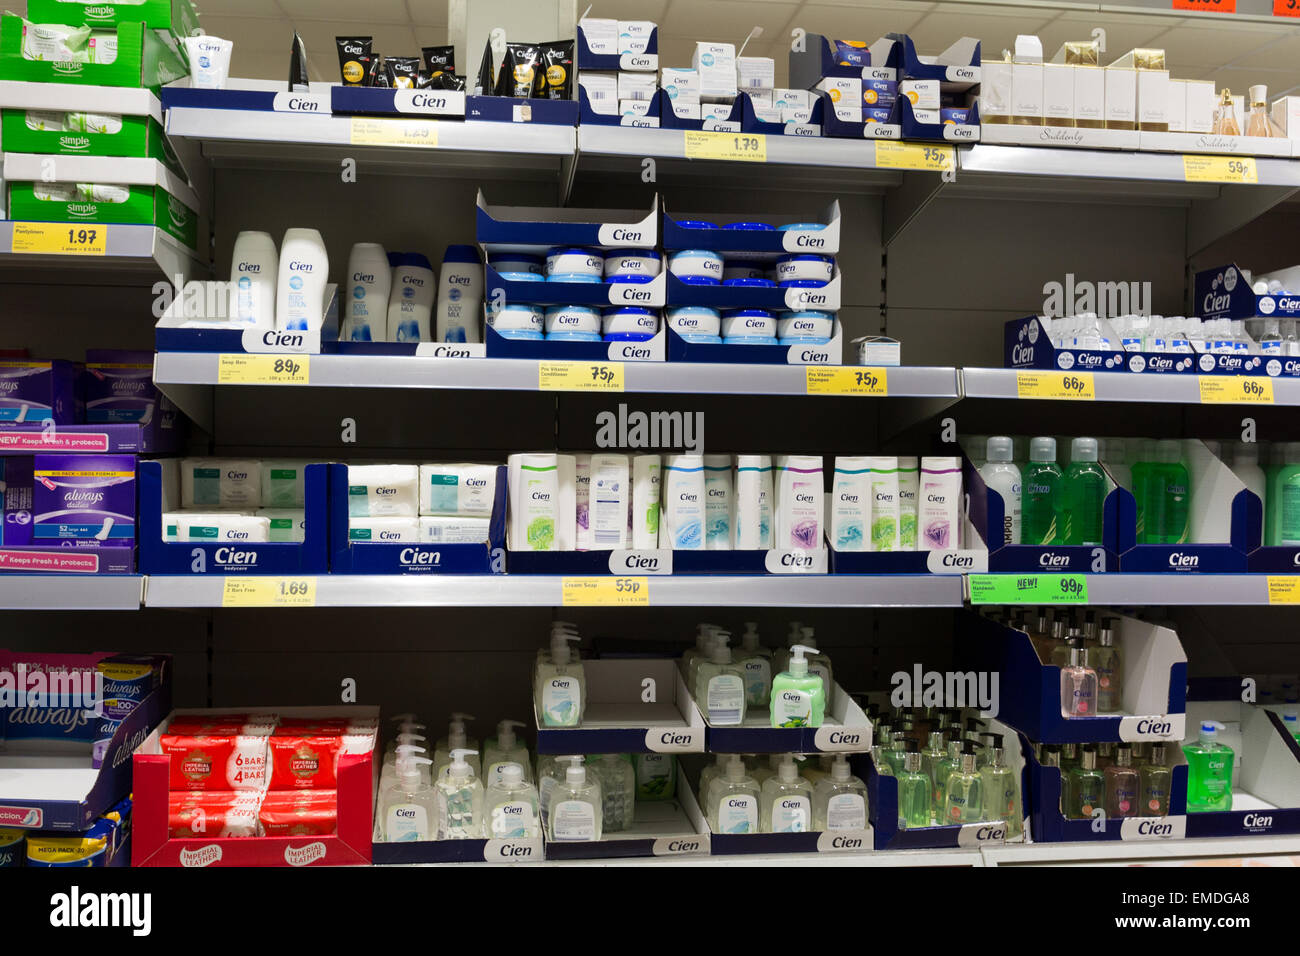 Lidl own brand Cien beauty products on a shelf in a Lidl store in London Stock Photo